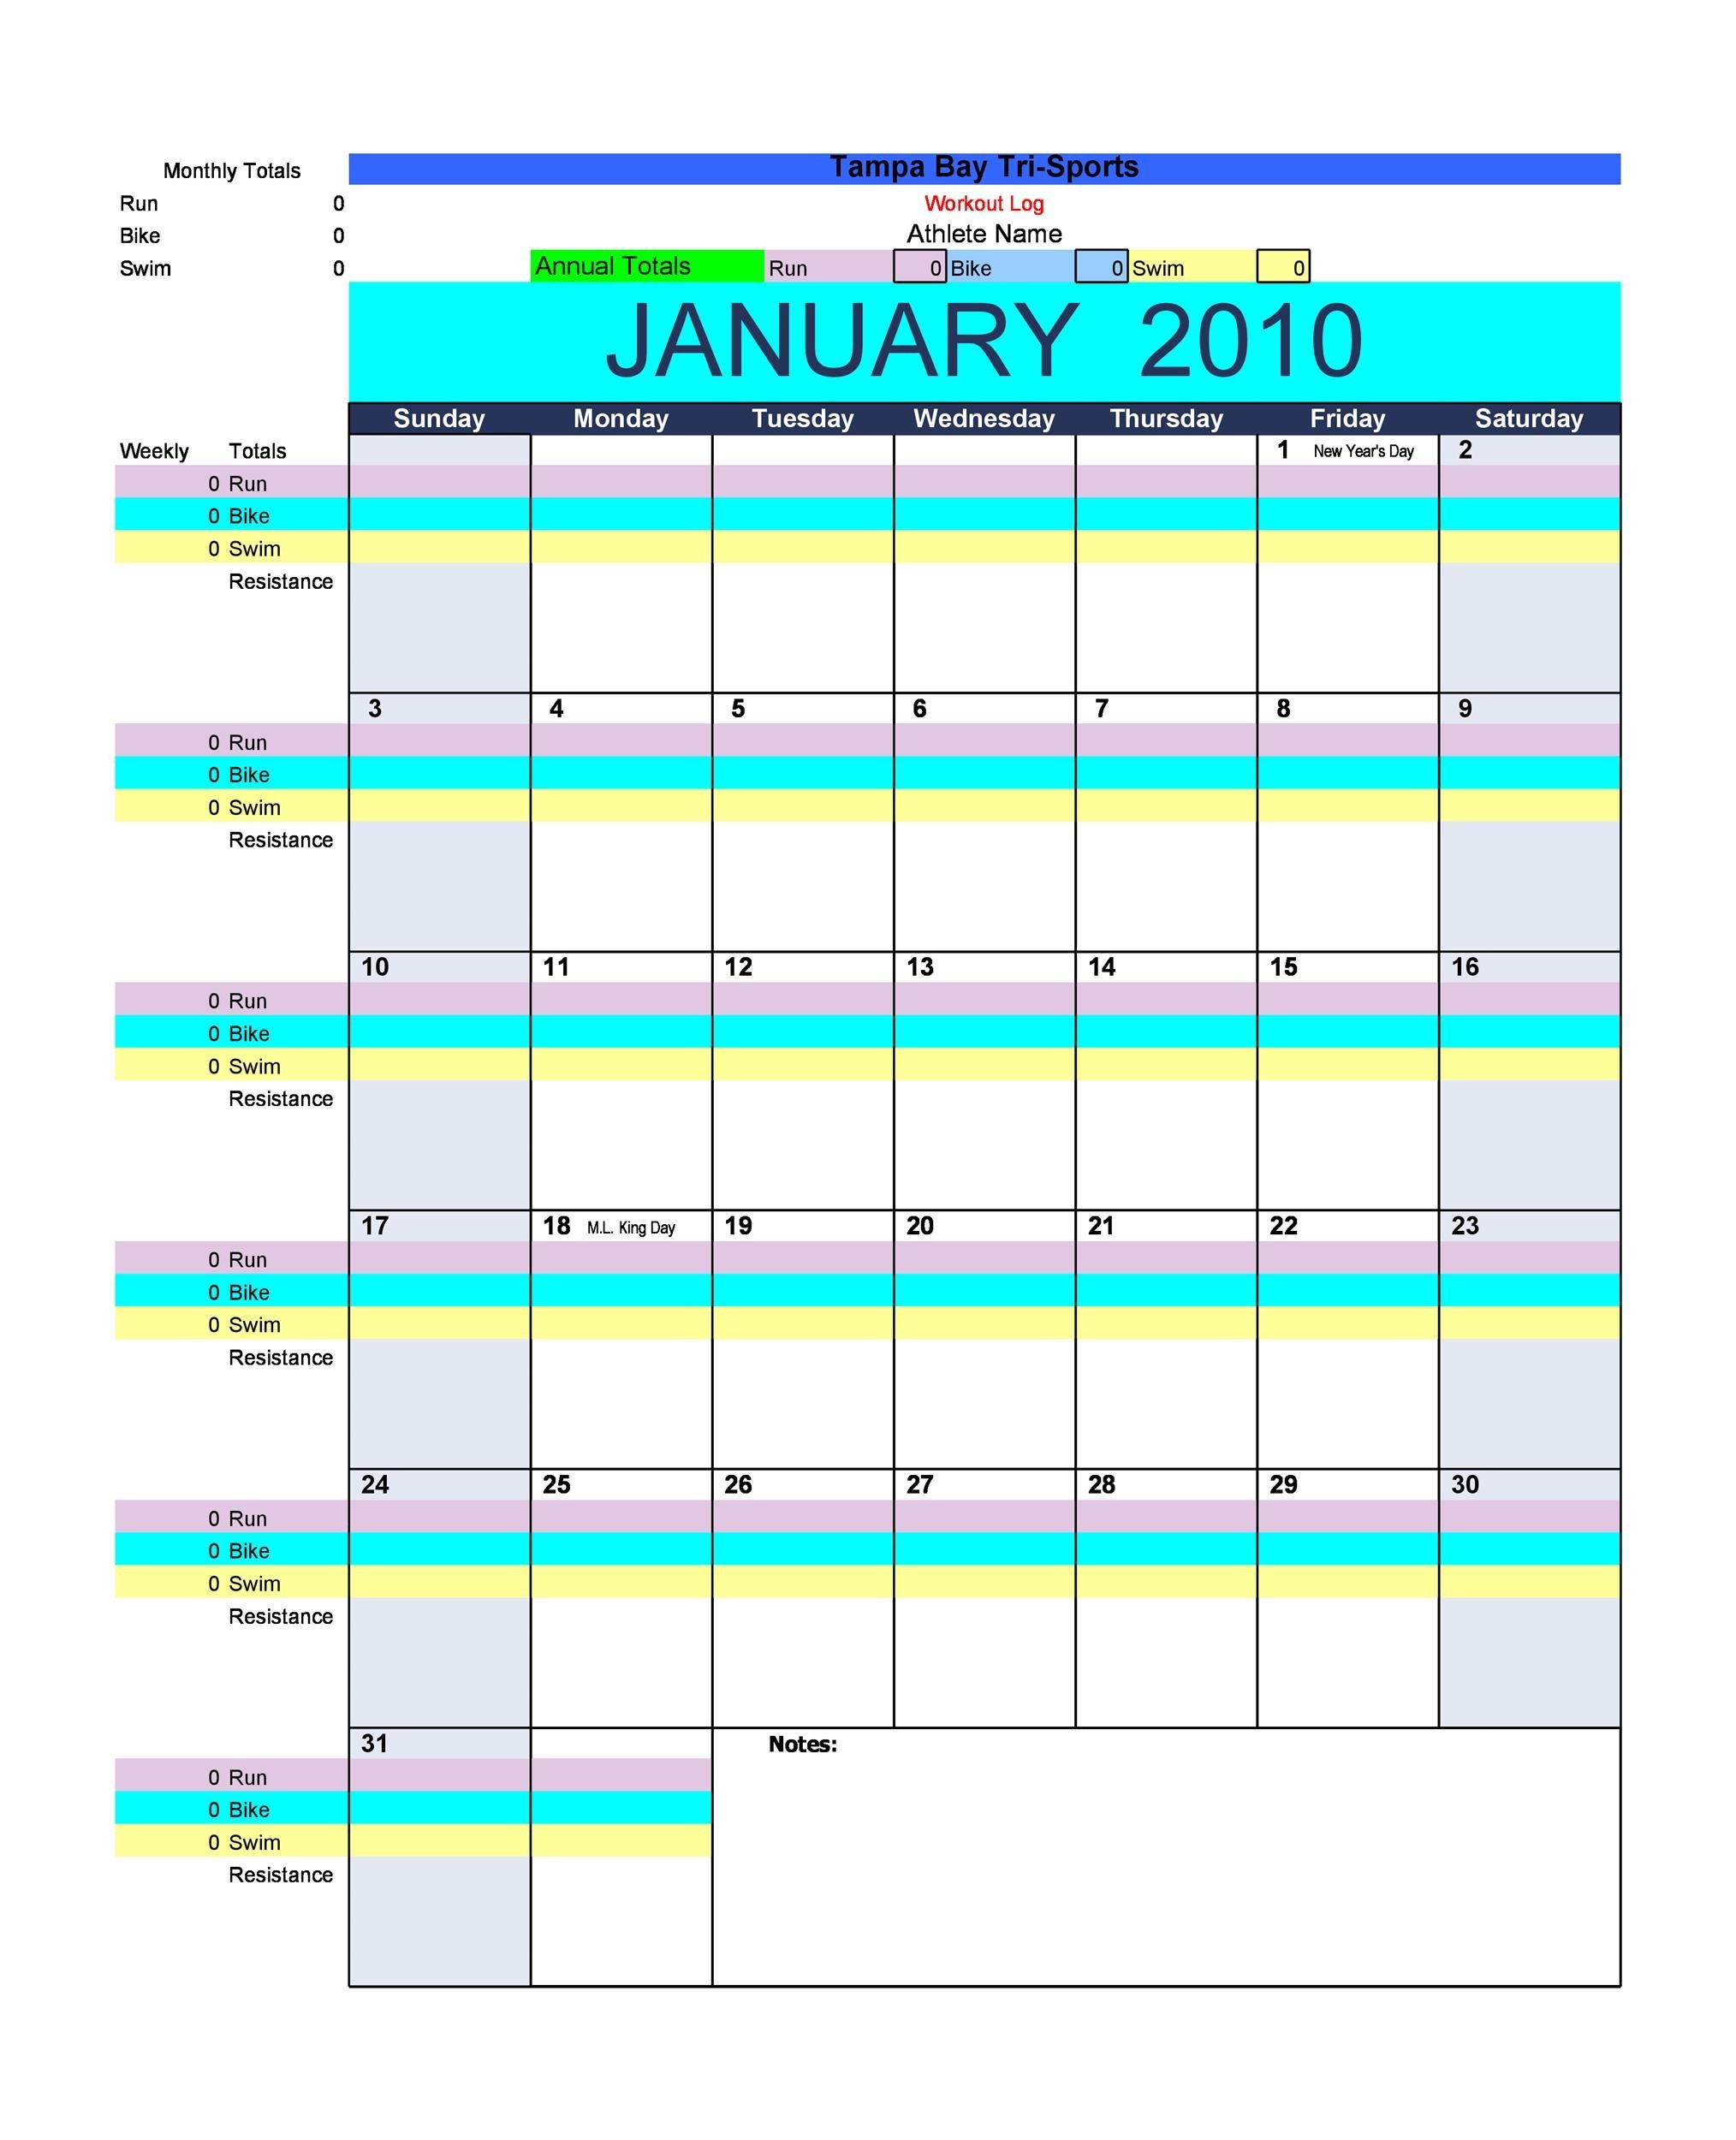 propsed calendar for work outs on excel 42